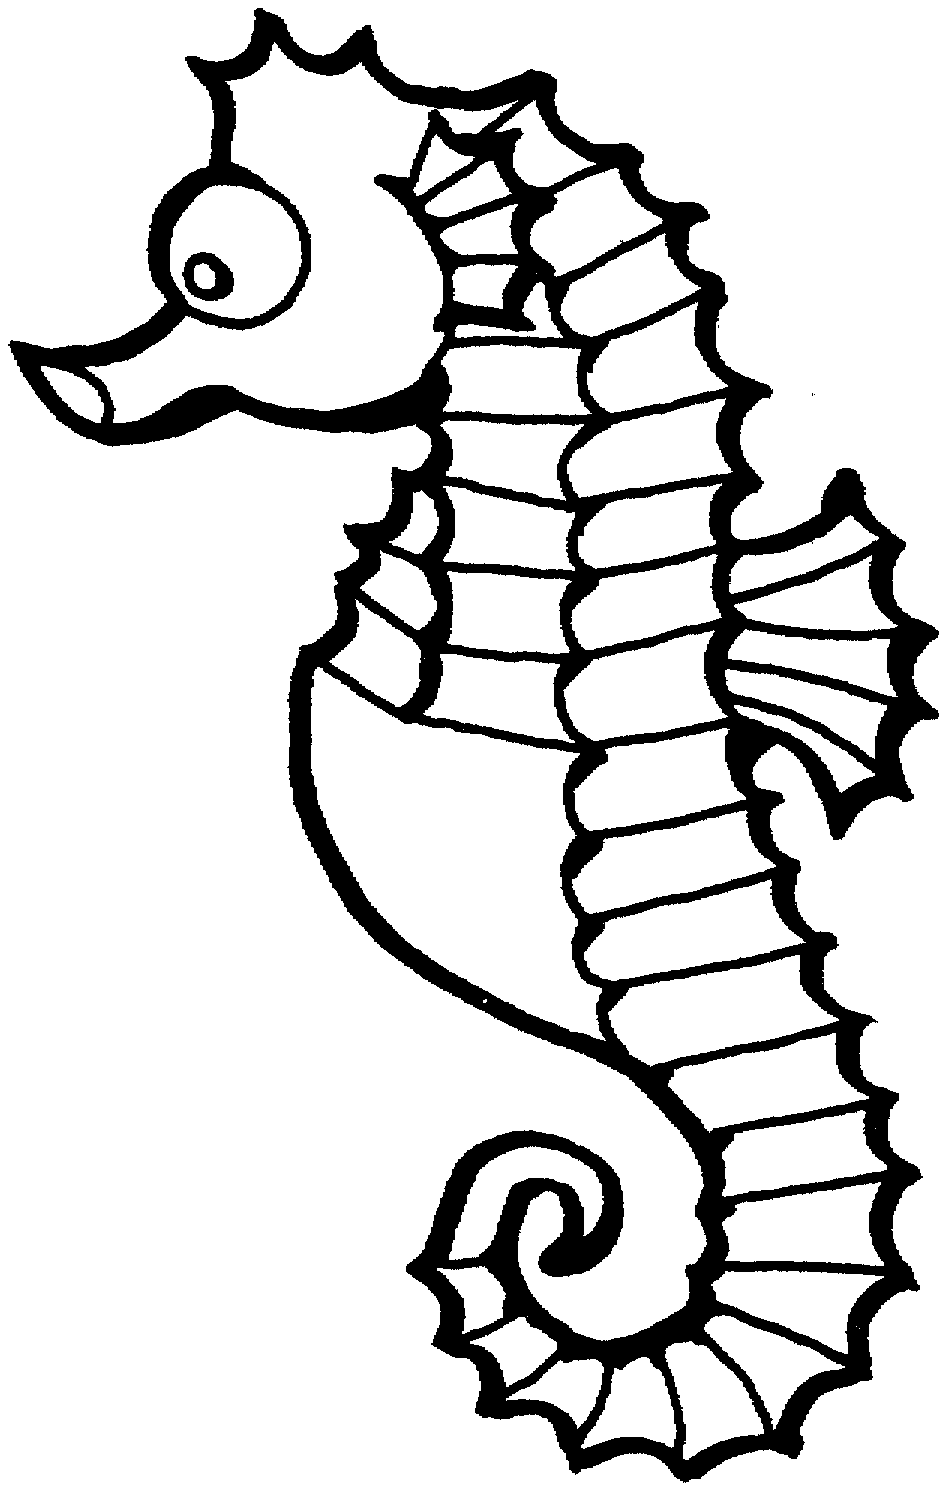 Sea Life Coloring Pages To Download And Print For Free